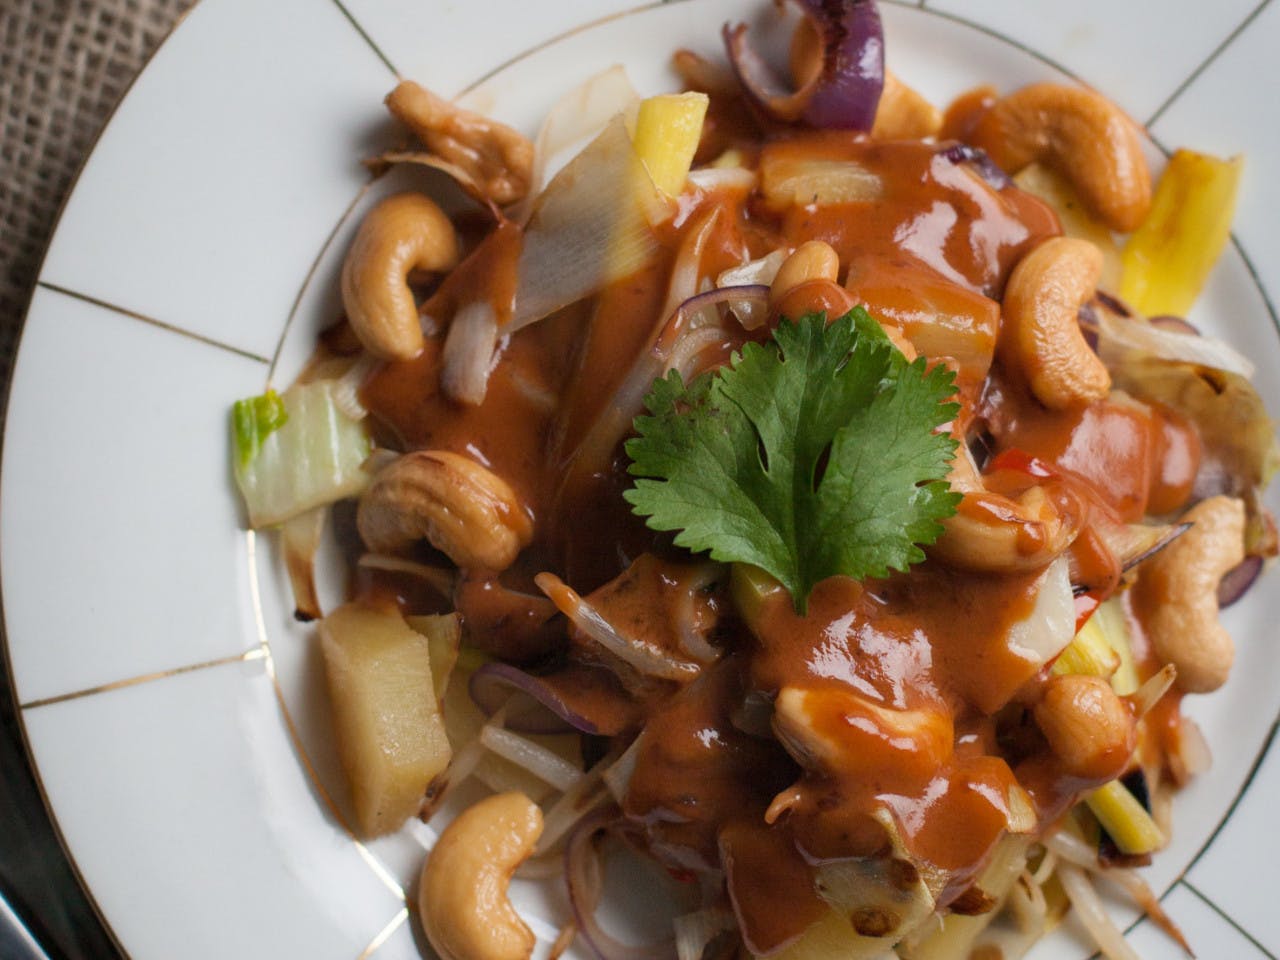 Sweet and sour stir-fry with cashews